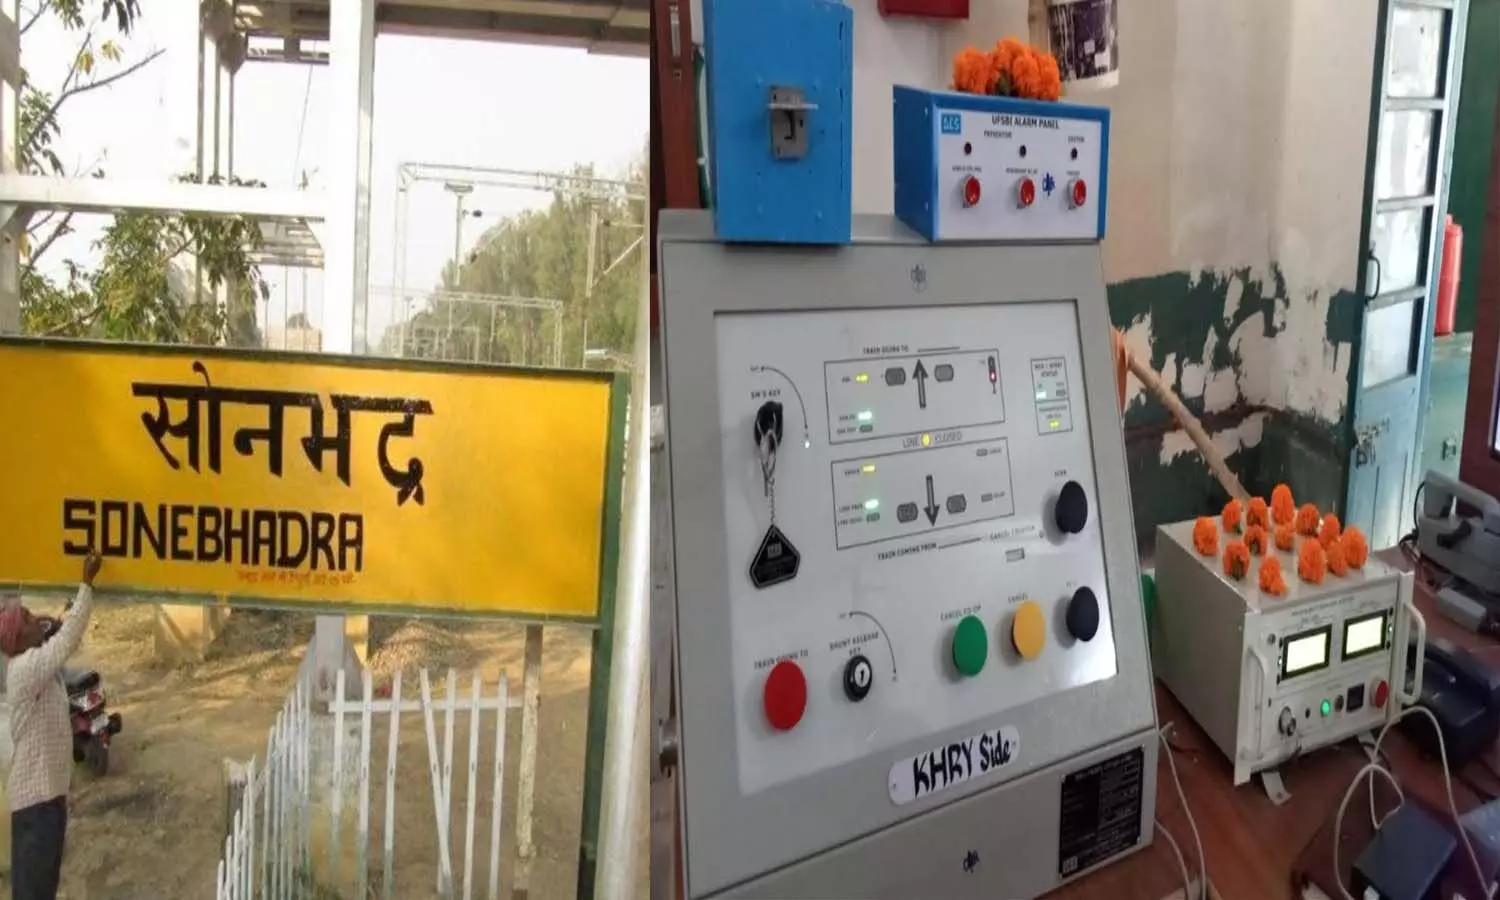 Trains will run at 100 km speed on Chopan-Chunar railway section, automatic signal system implemented at Sonbhadra station